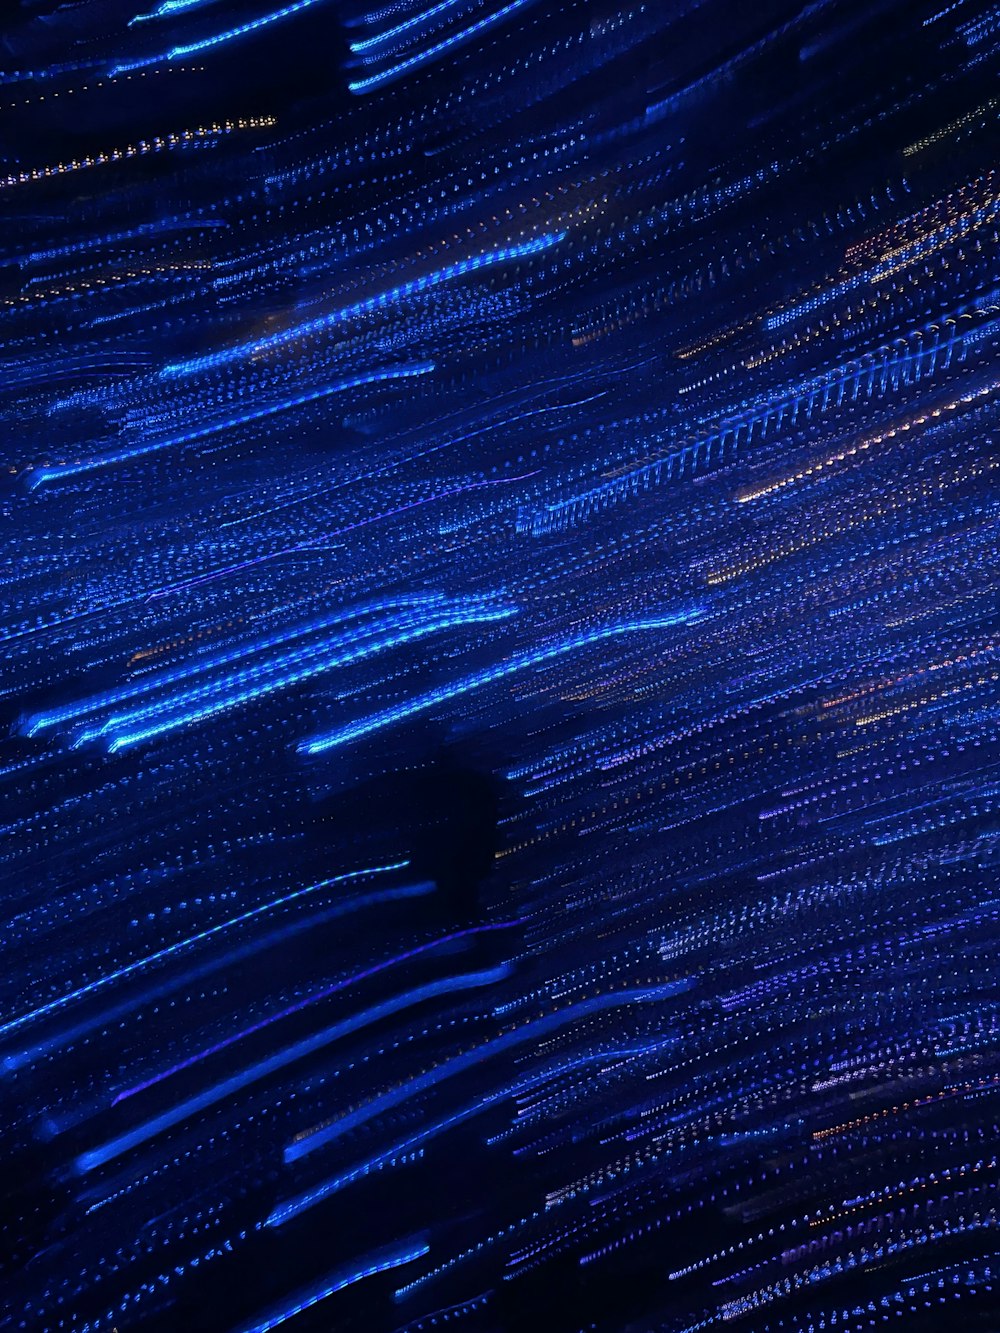 a very long exposure of blue lights in the night sky